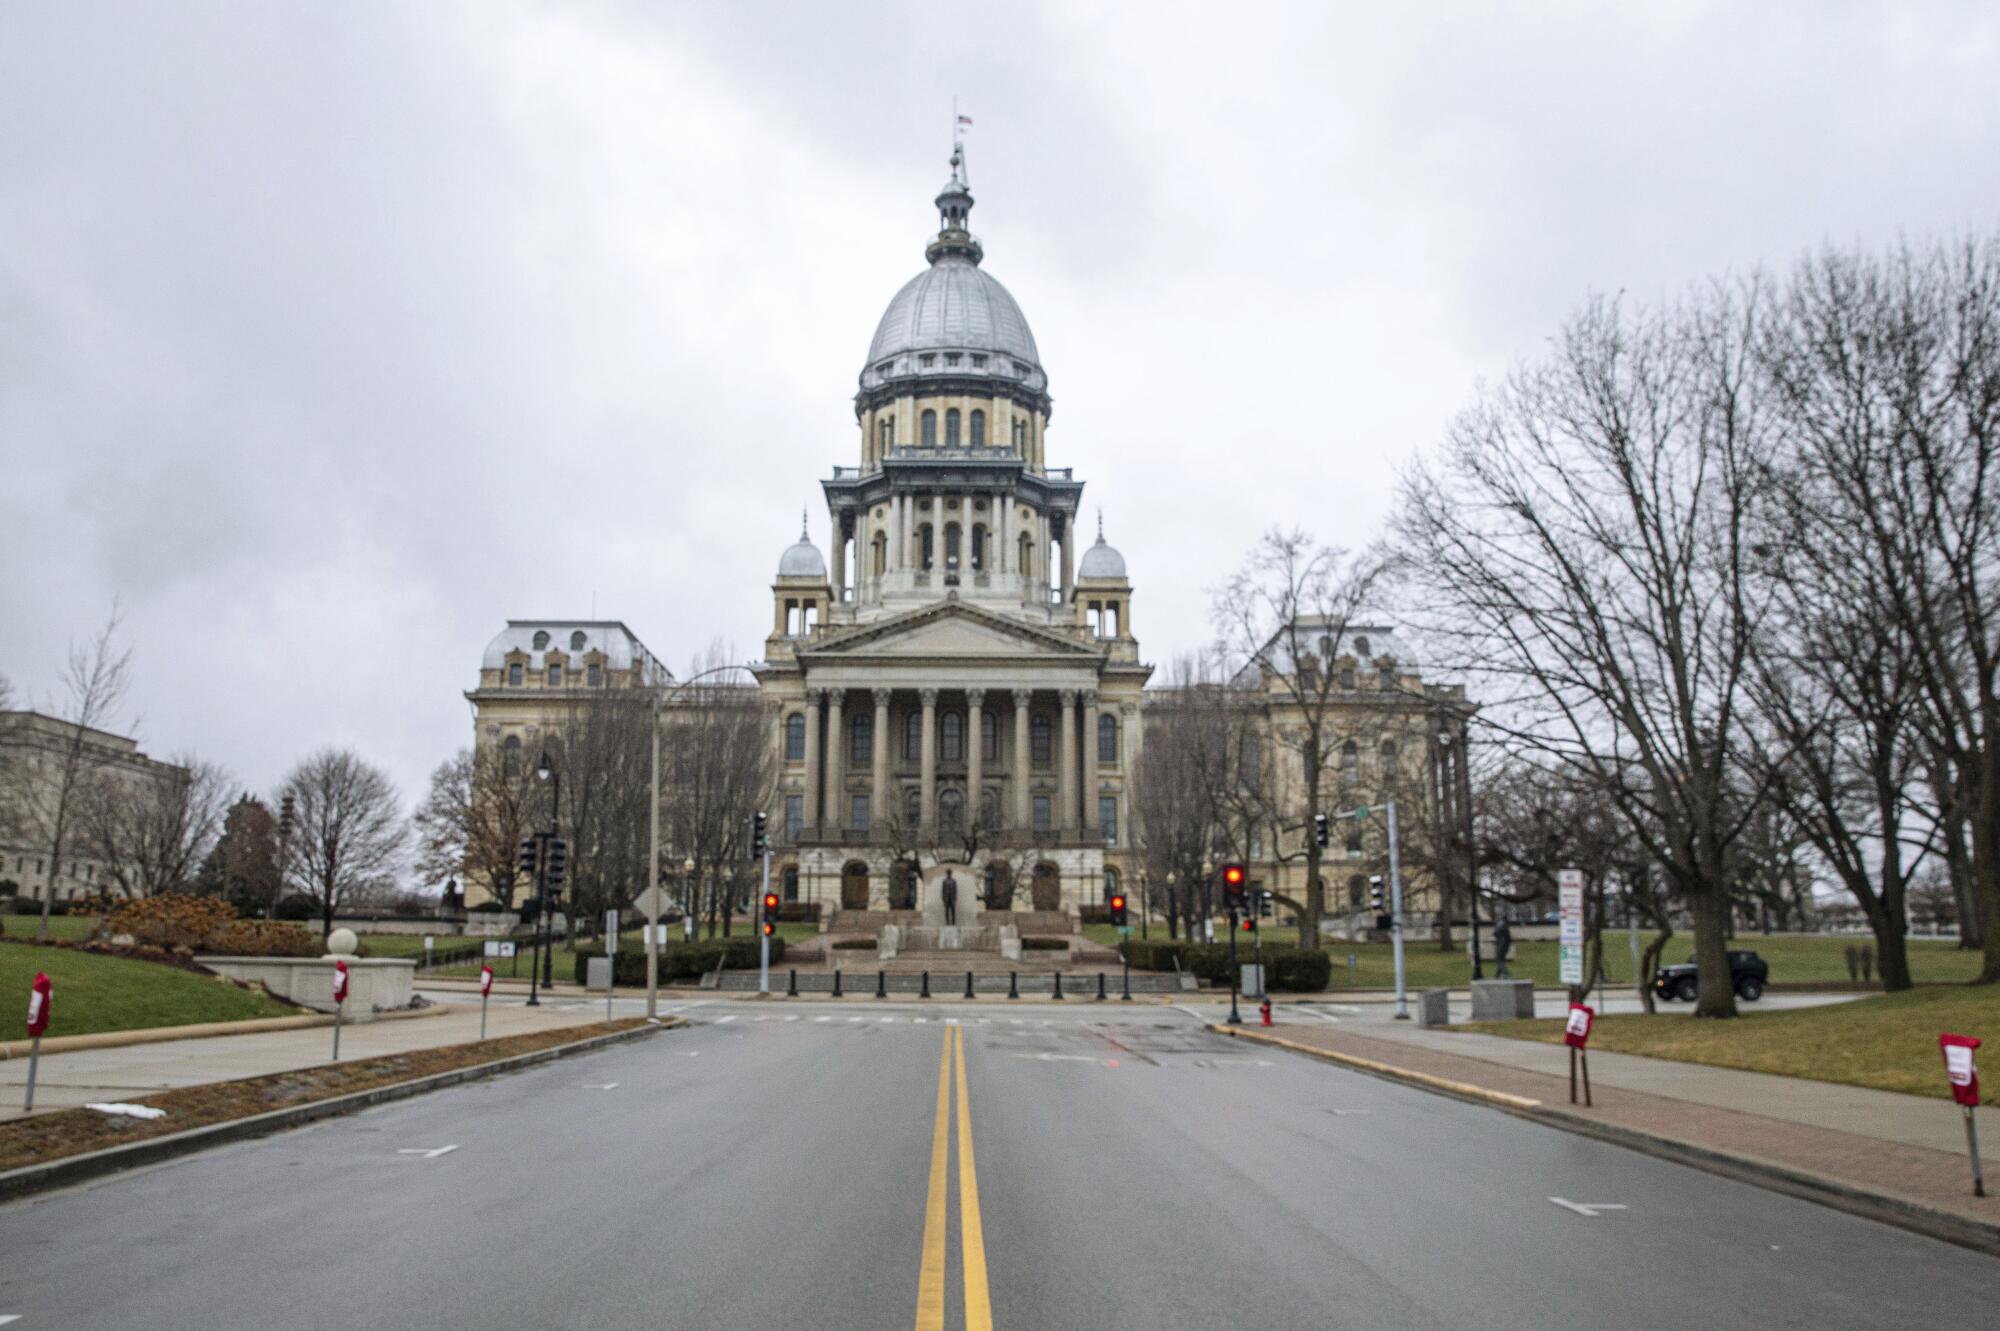 Parking spots around the perimeter of the Illinois State Capitol have been blocked off for possible protests.